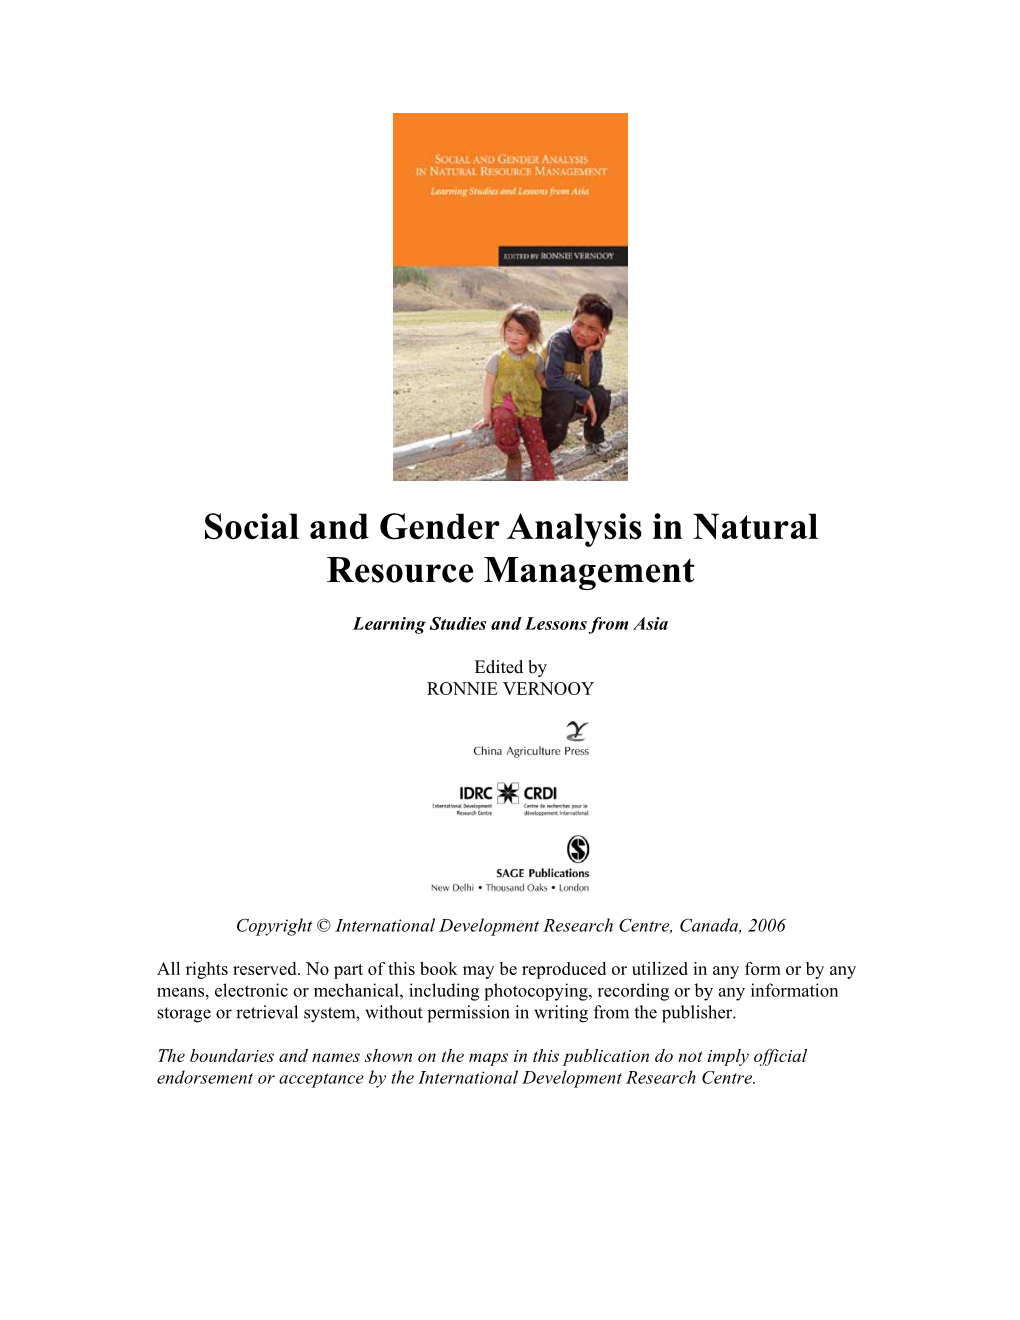 Social and Gender Analysis in Natural Resource Management